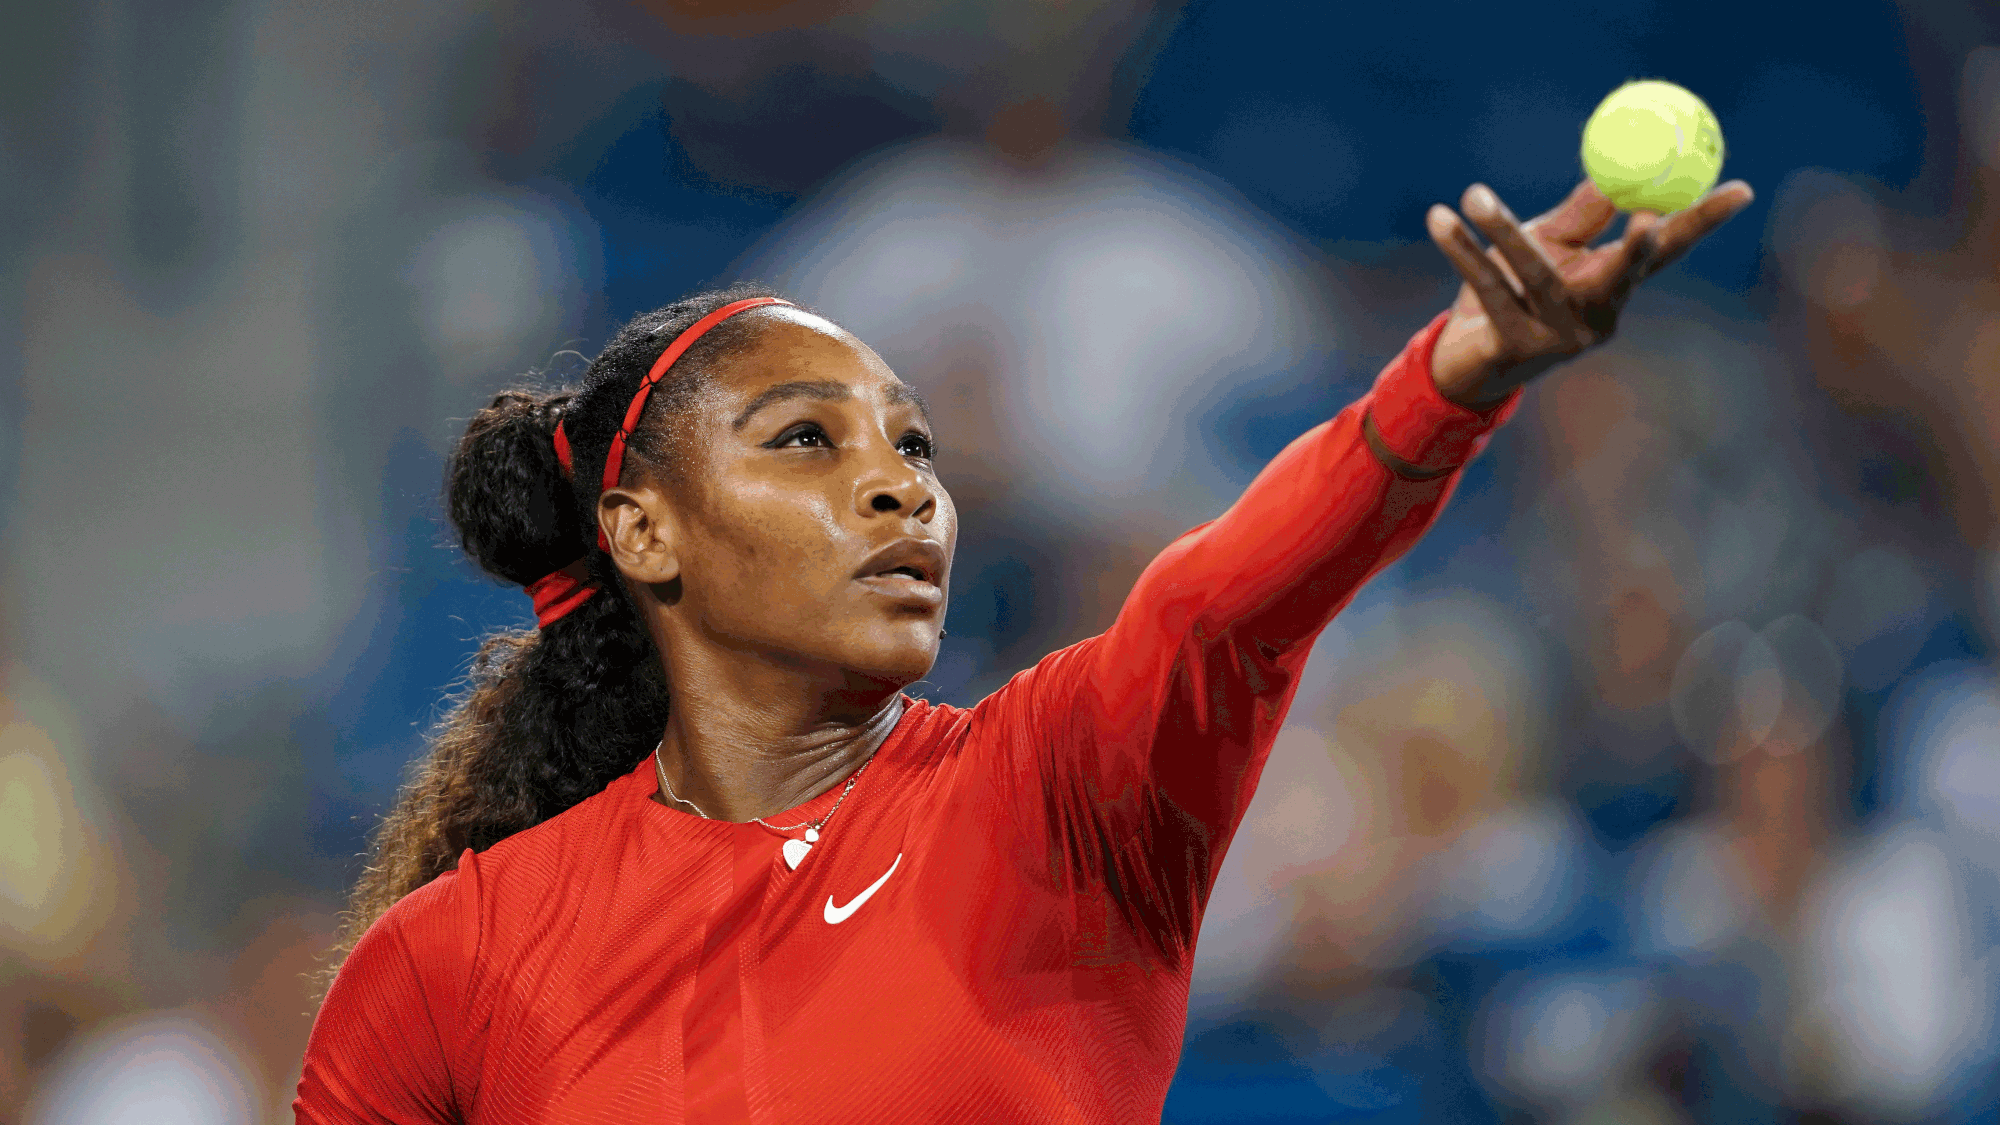 Serena Williams got a bit of a boost in the seedings for the US Open.